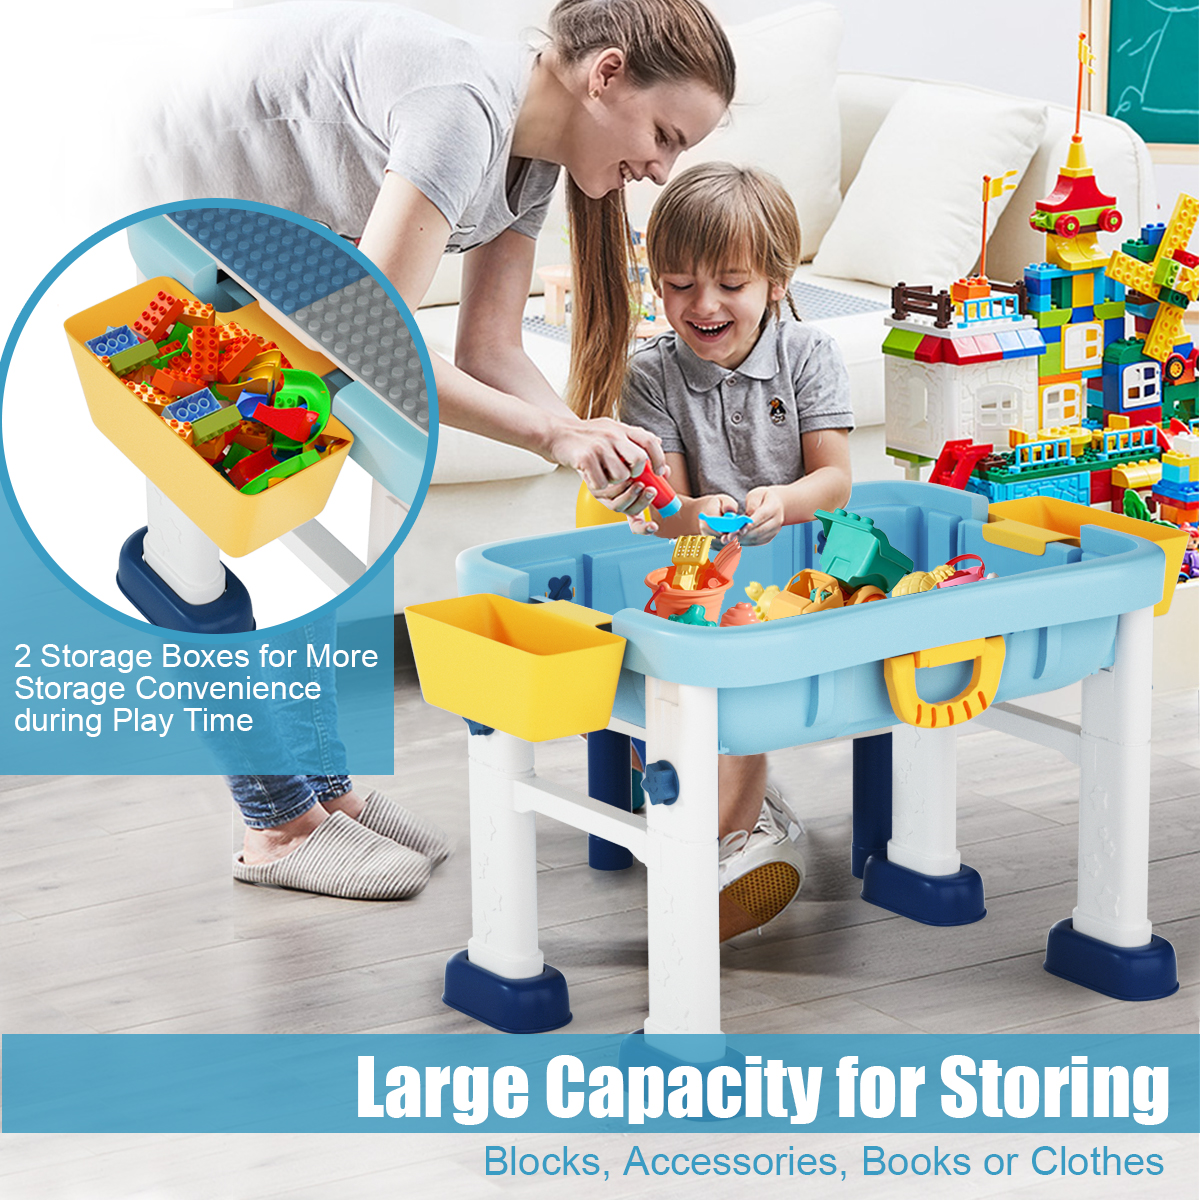 Costway 6 in 1 Kids Activity Table Set w/ Chair Toddler Luggage Building Block Table